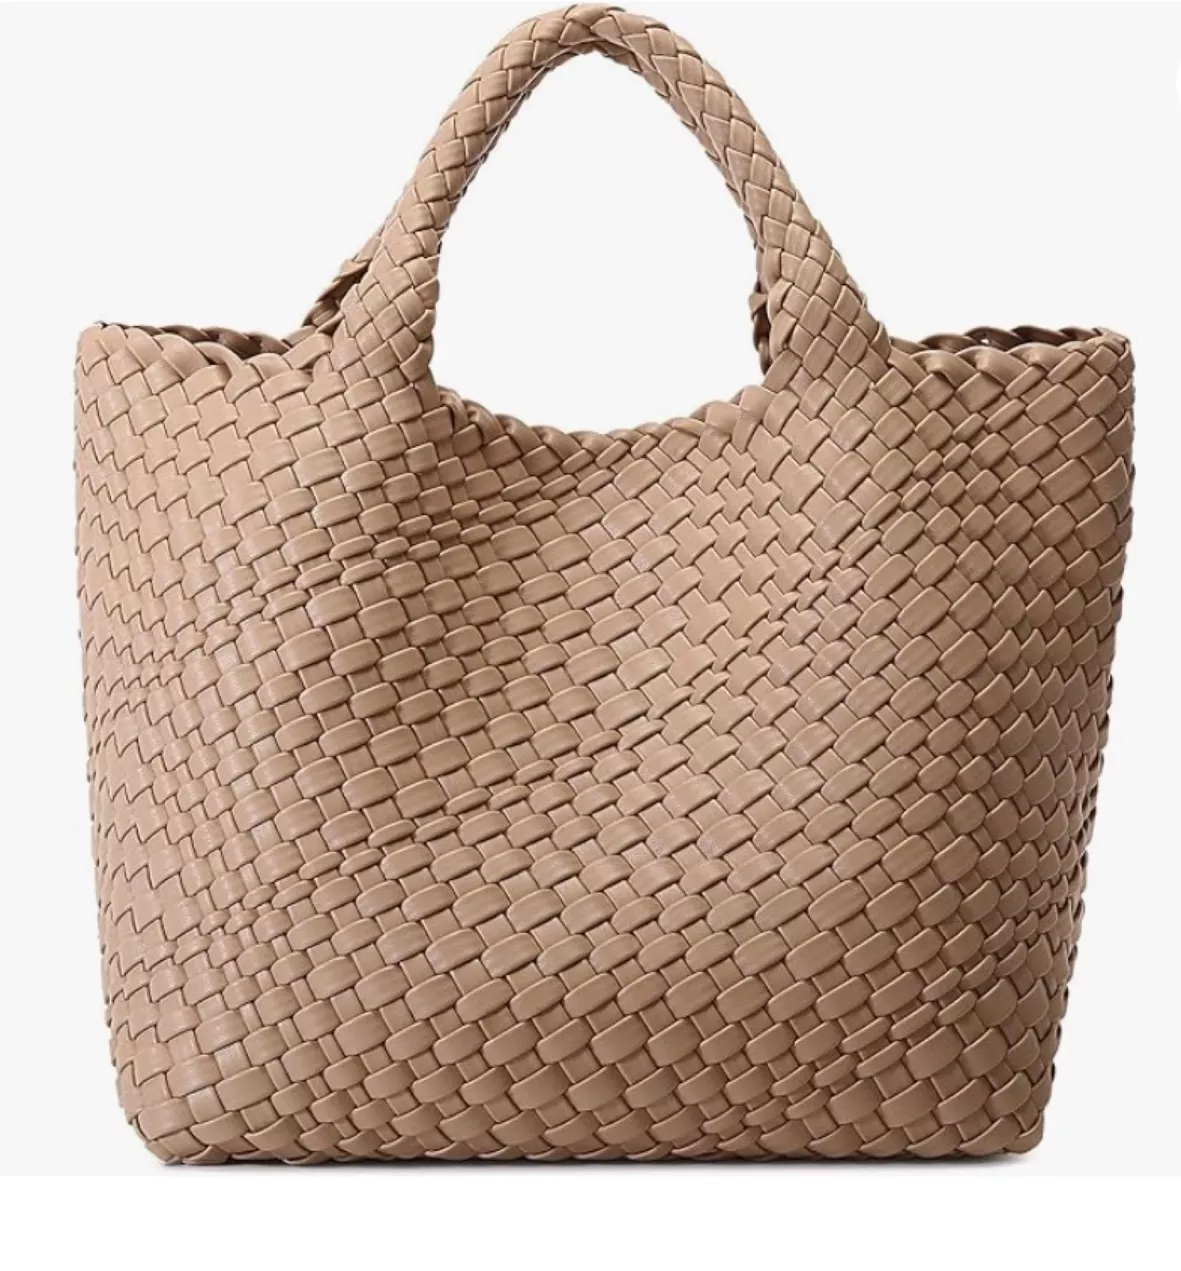 The Love Knot Faux Leather Bag